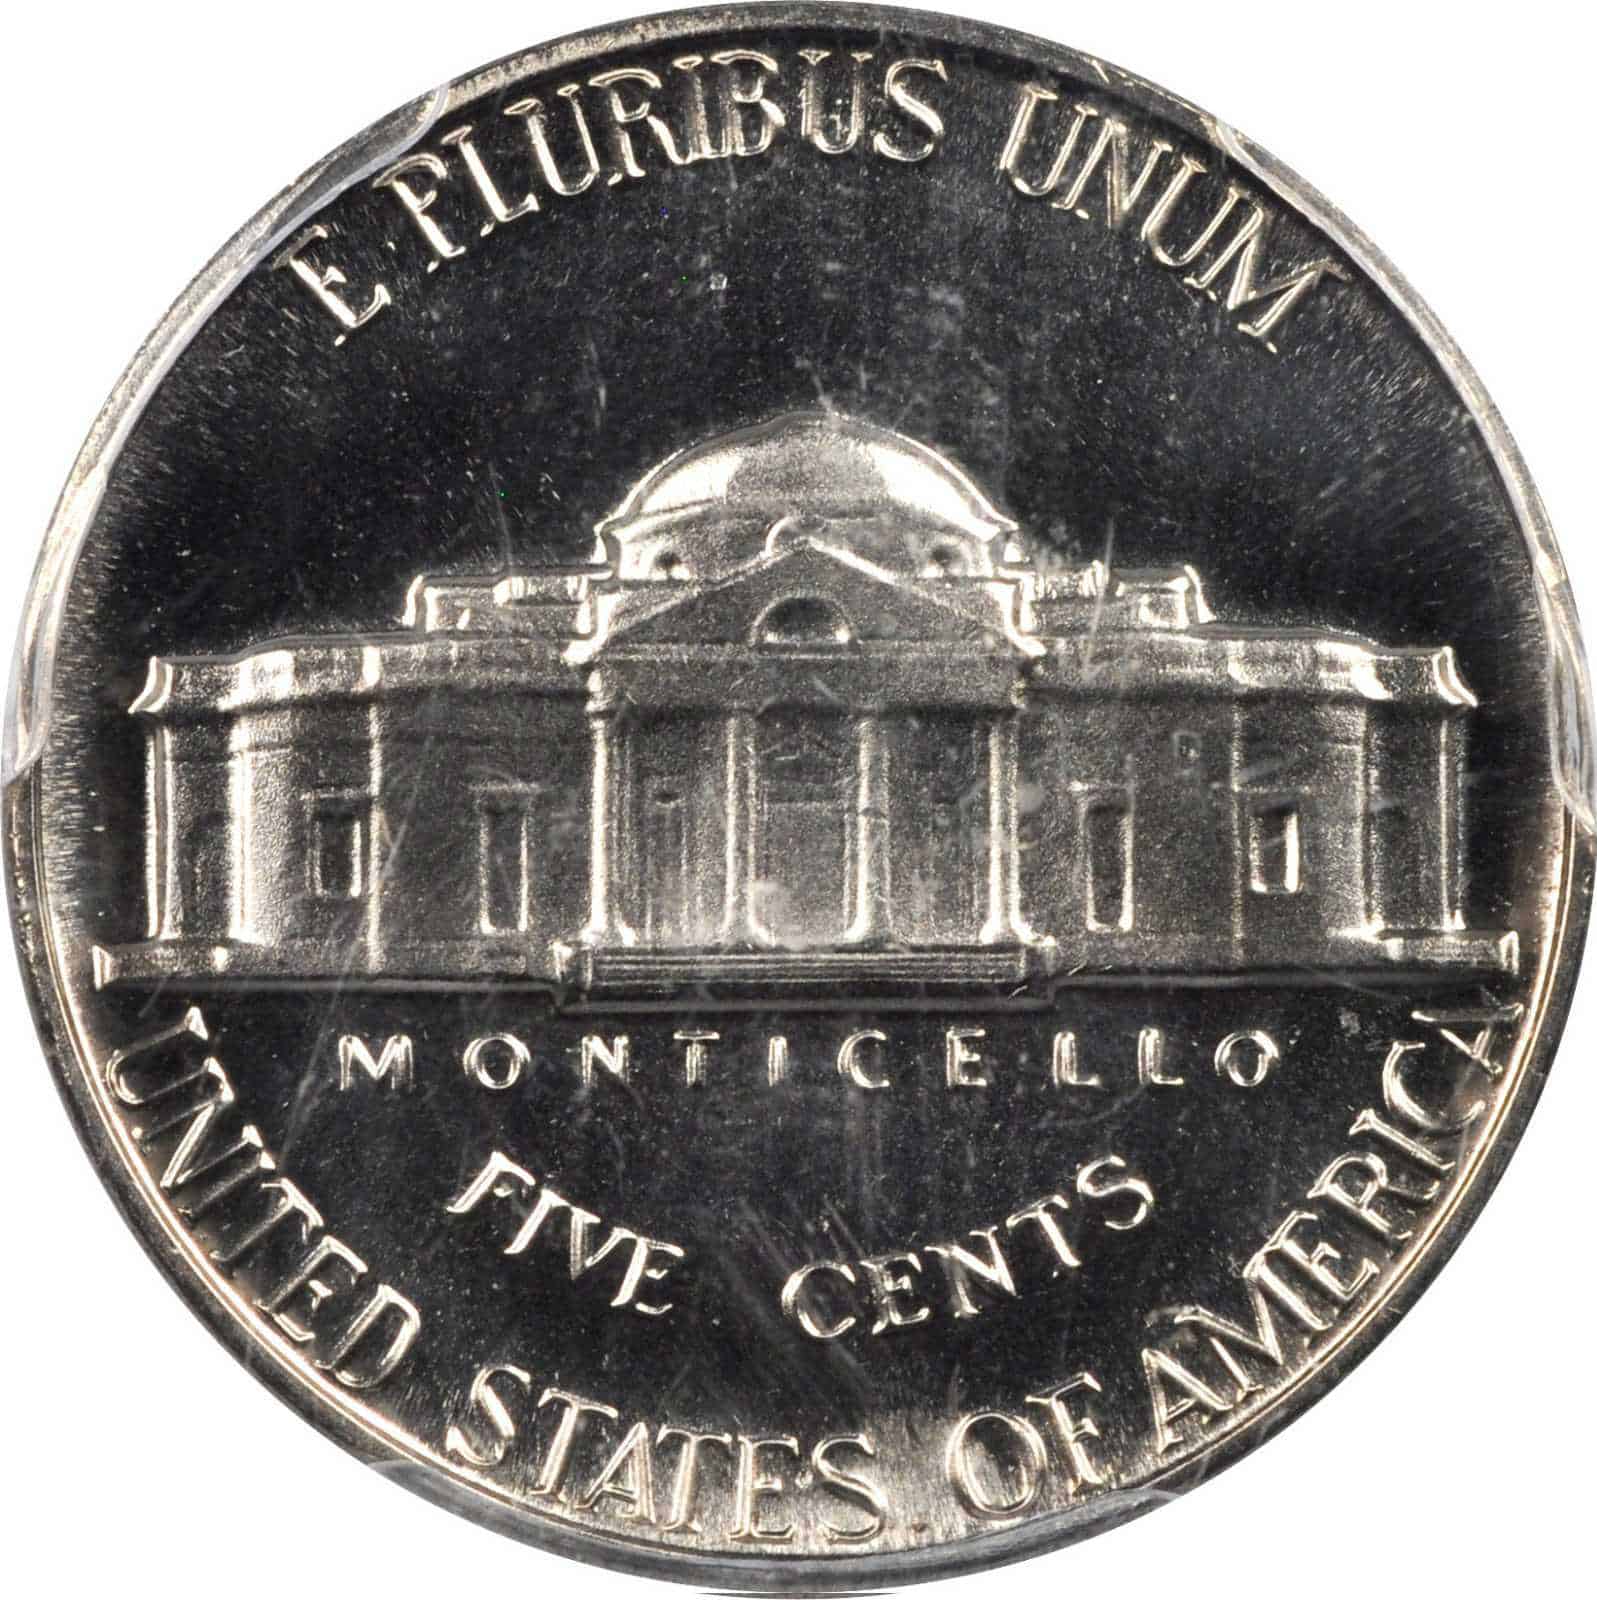 The reverse of the 1966 Jefferson nickel